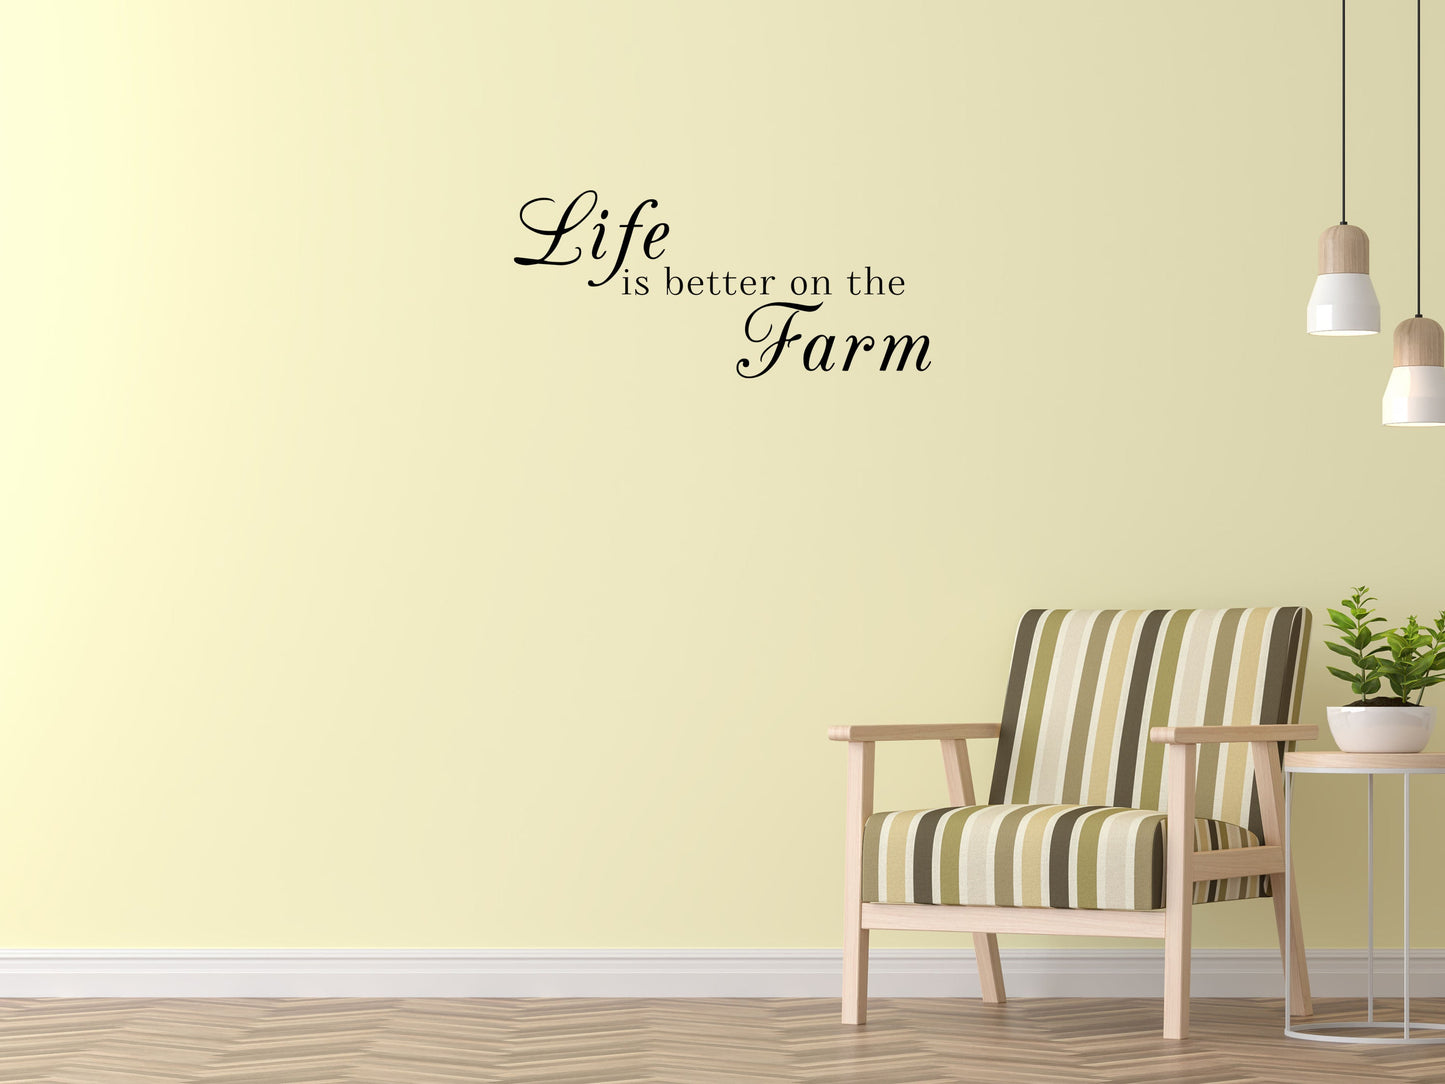 Life Is Better On The Farm Vinyl Wall Decal Inspirational Wall Signs 